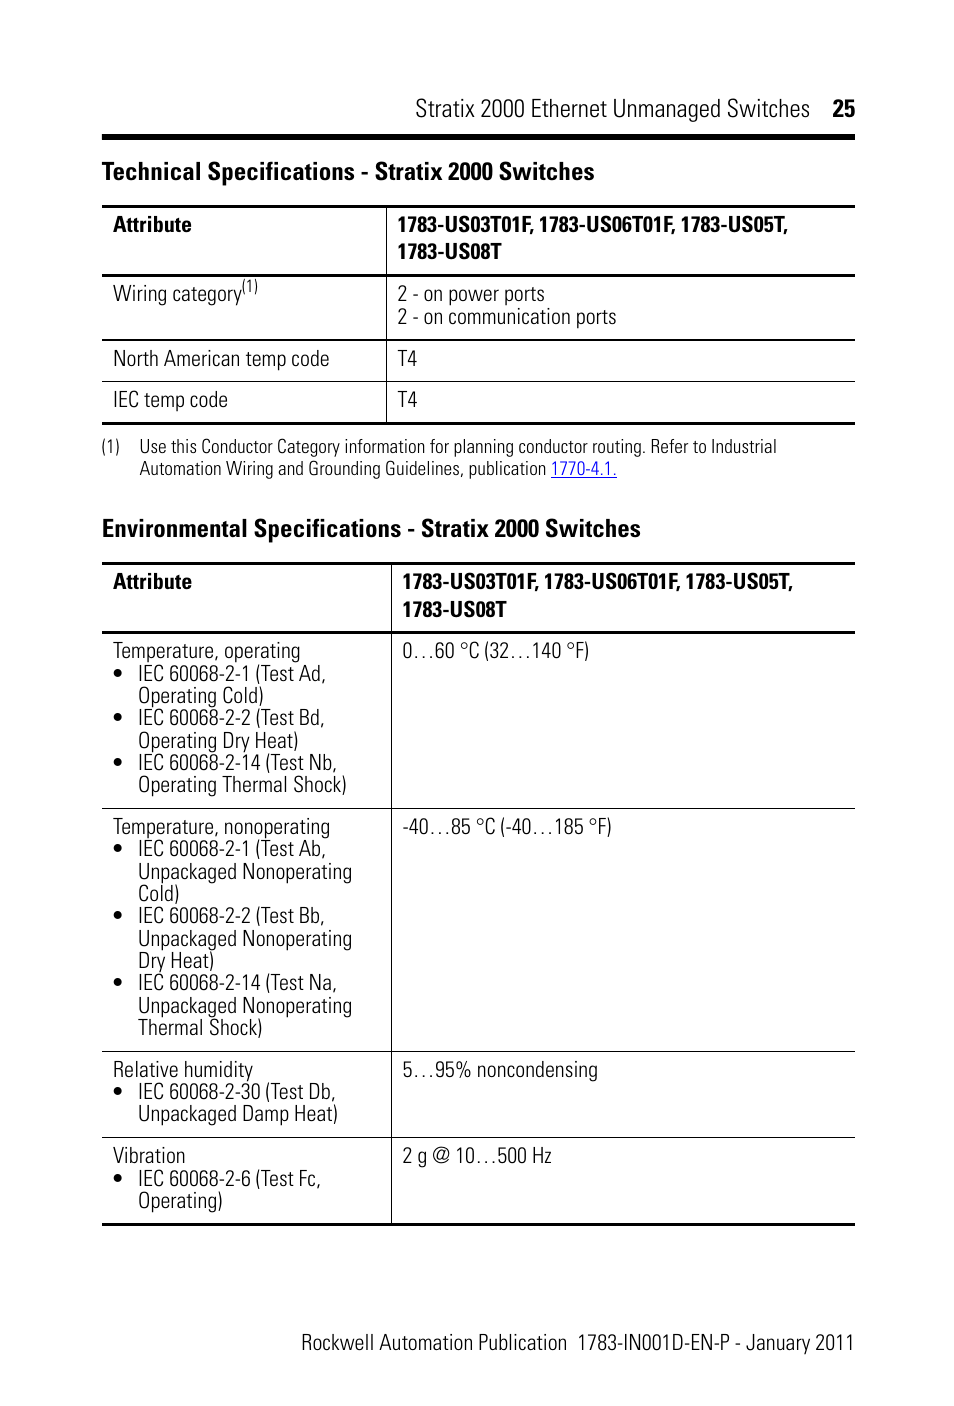 Rockwell Automation 1783-US08T Stratix 2000 Ethernet Unmanaged Switch Installation Instructions User Manual | Page 25 / 28